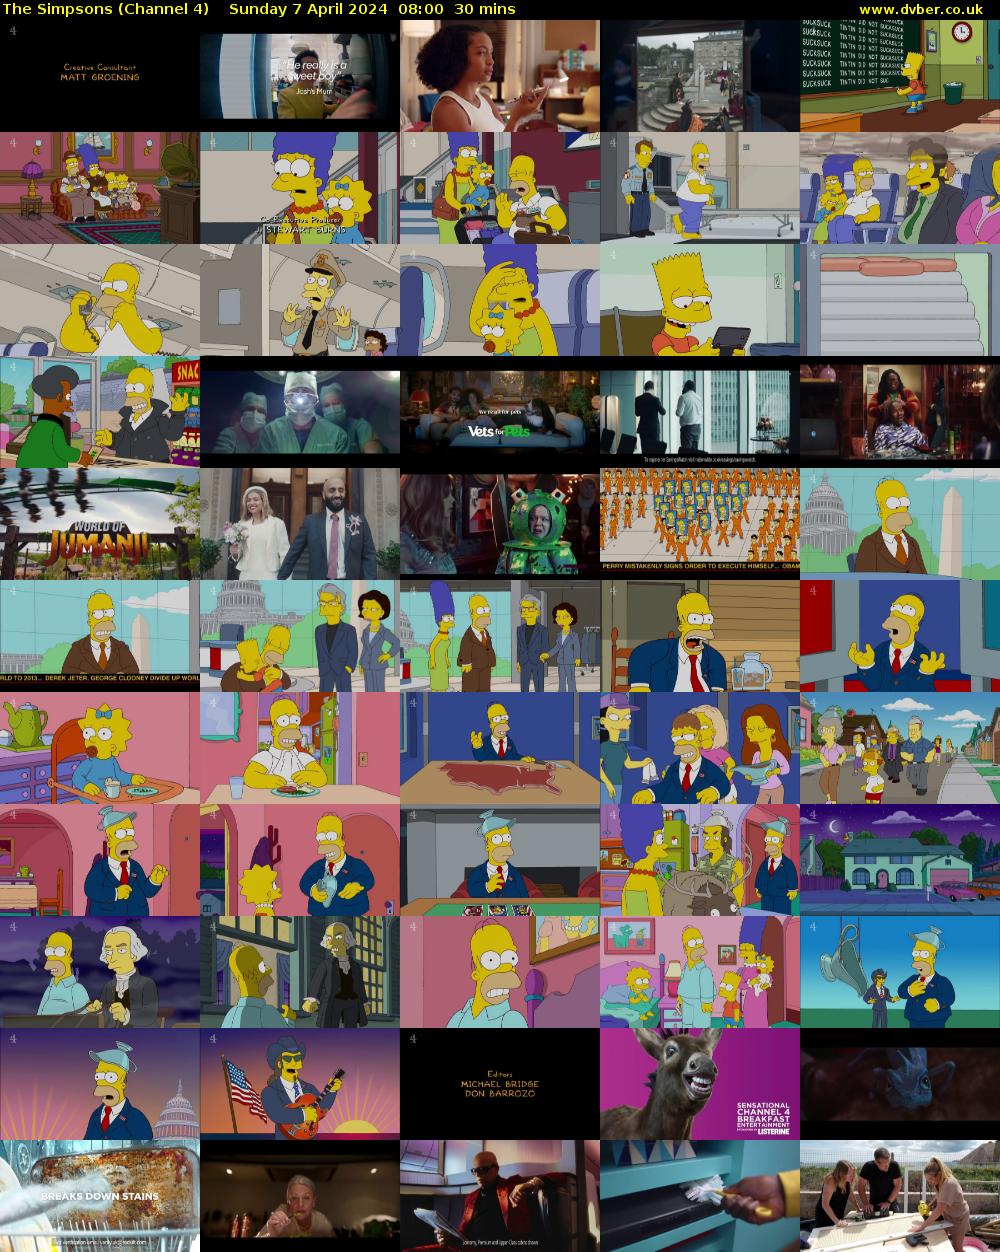 The Simpsons (Channel 4) Sunday 7 April 2024 08:00 - 08:30